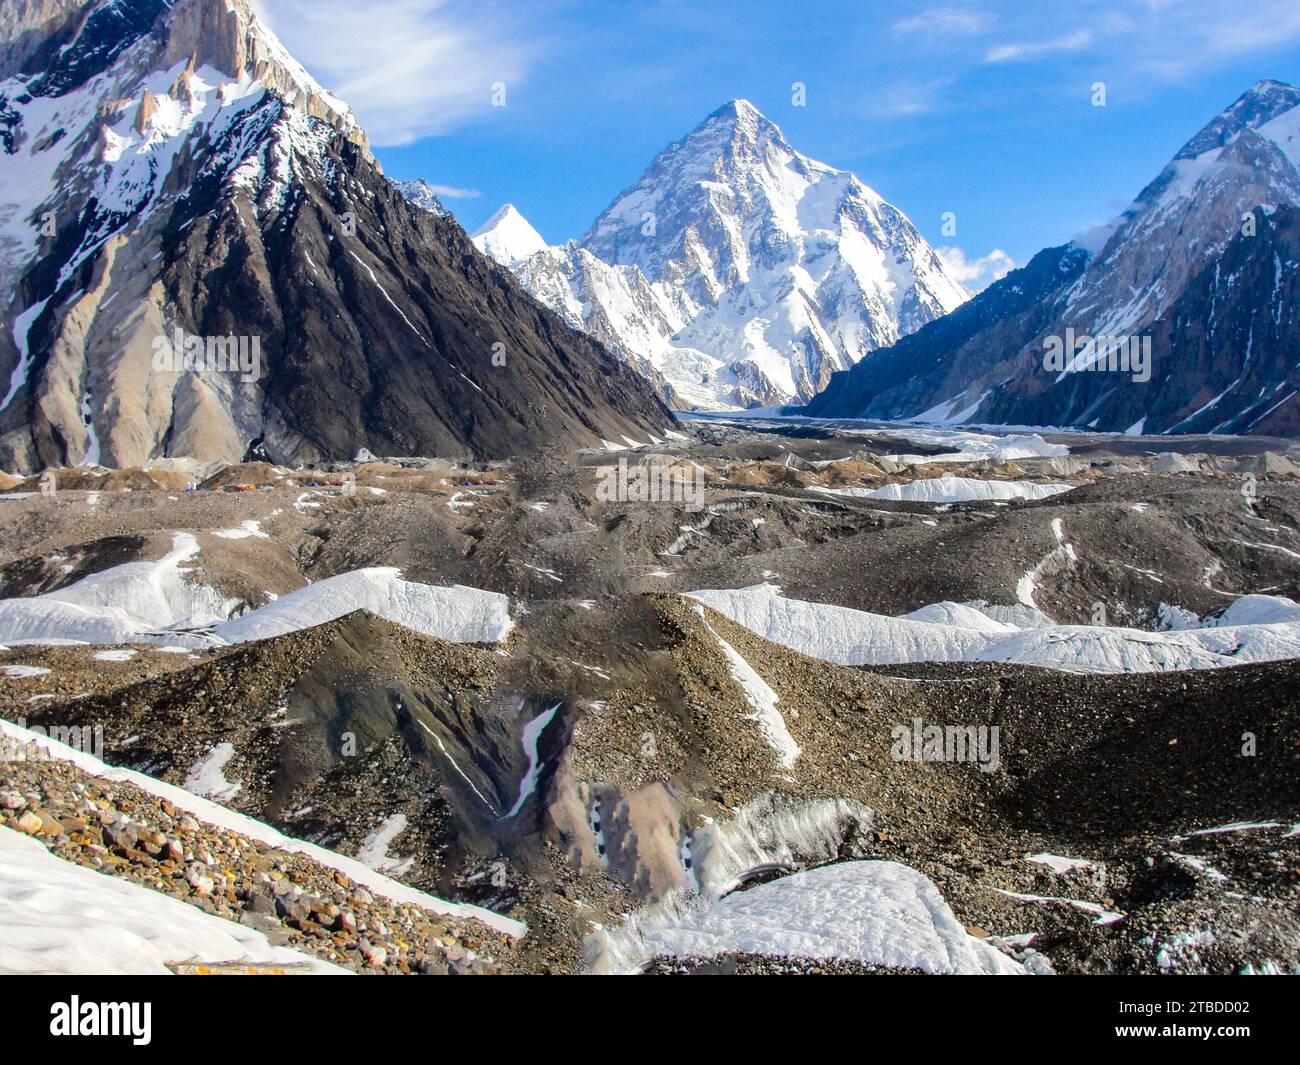 Fascinating view of the K2 Summit, 8,611 m above sea level, the second highest mountain on the earth situated in the Gilgit Baltistan region, Pakistan Stock Photo